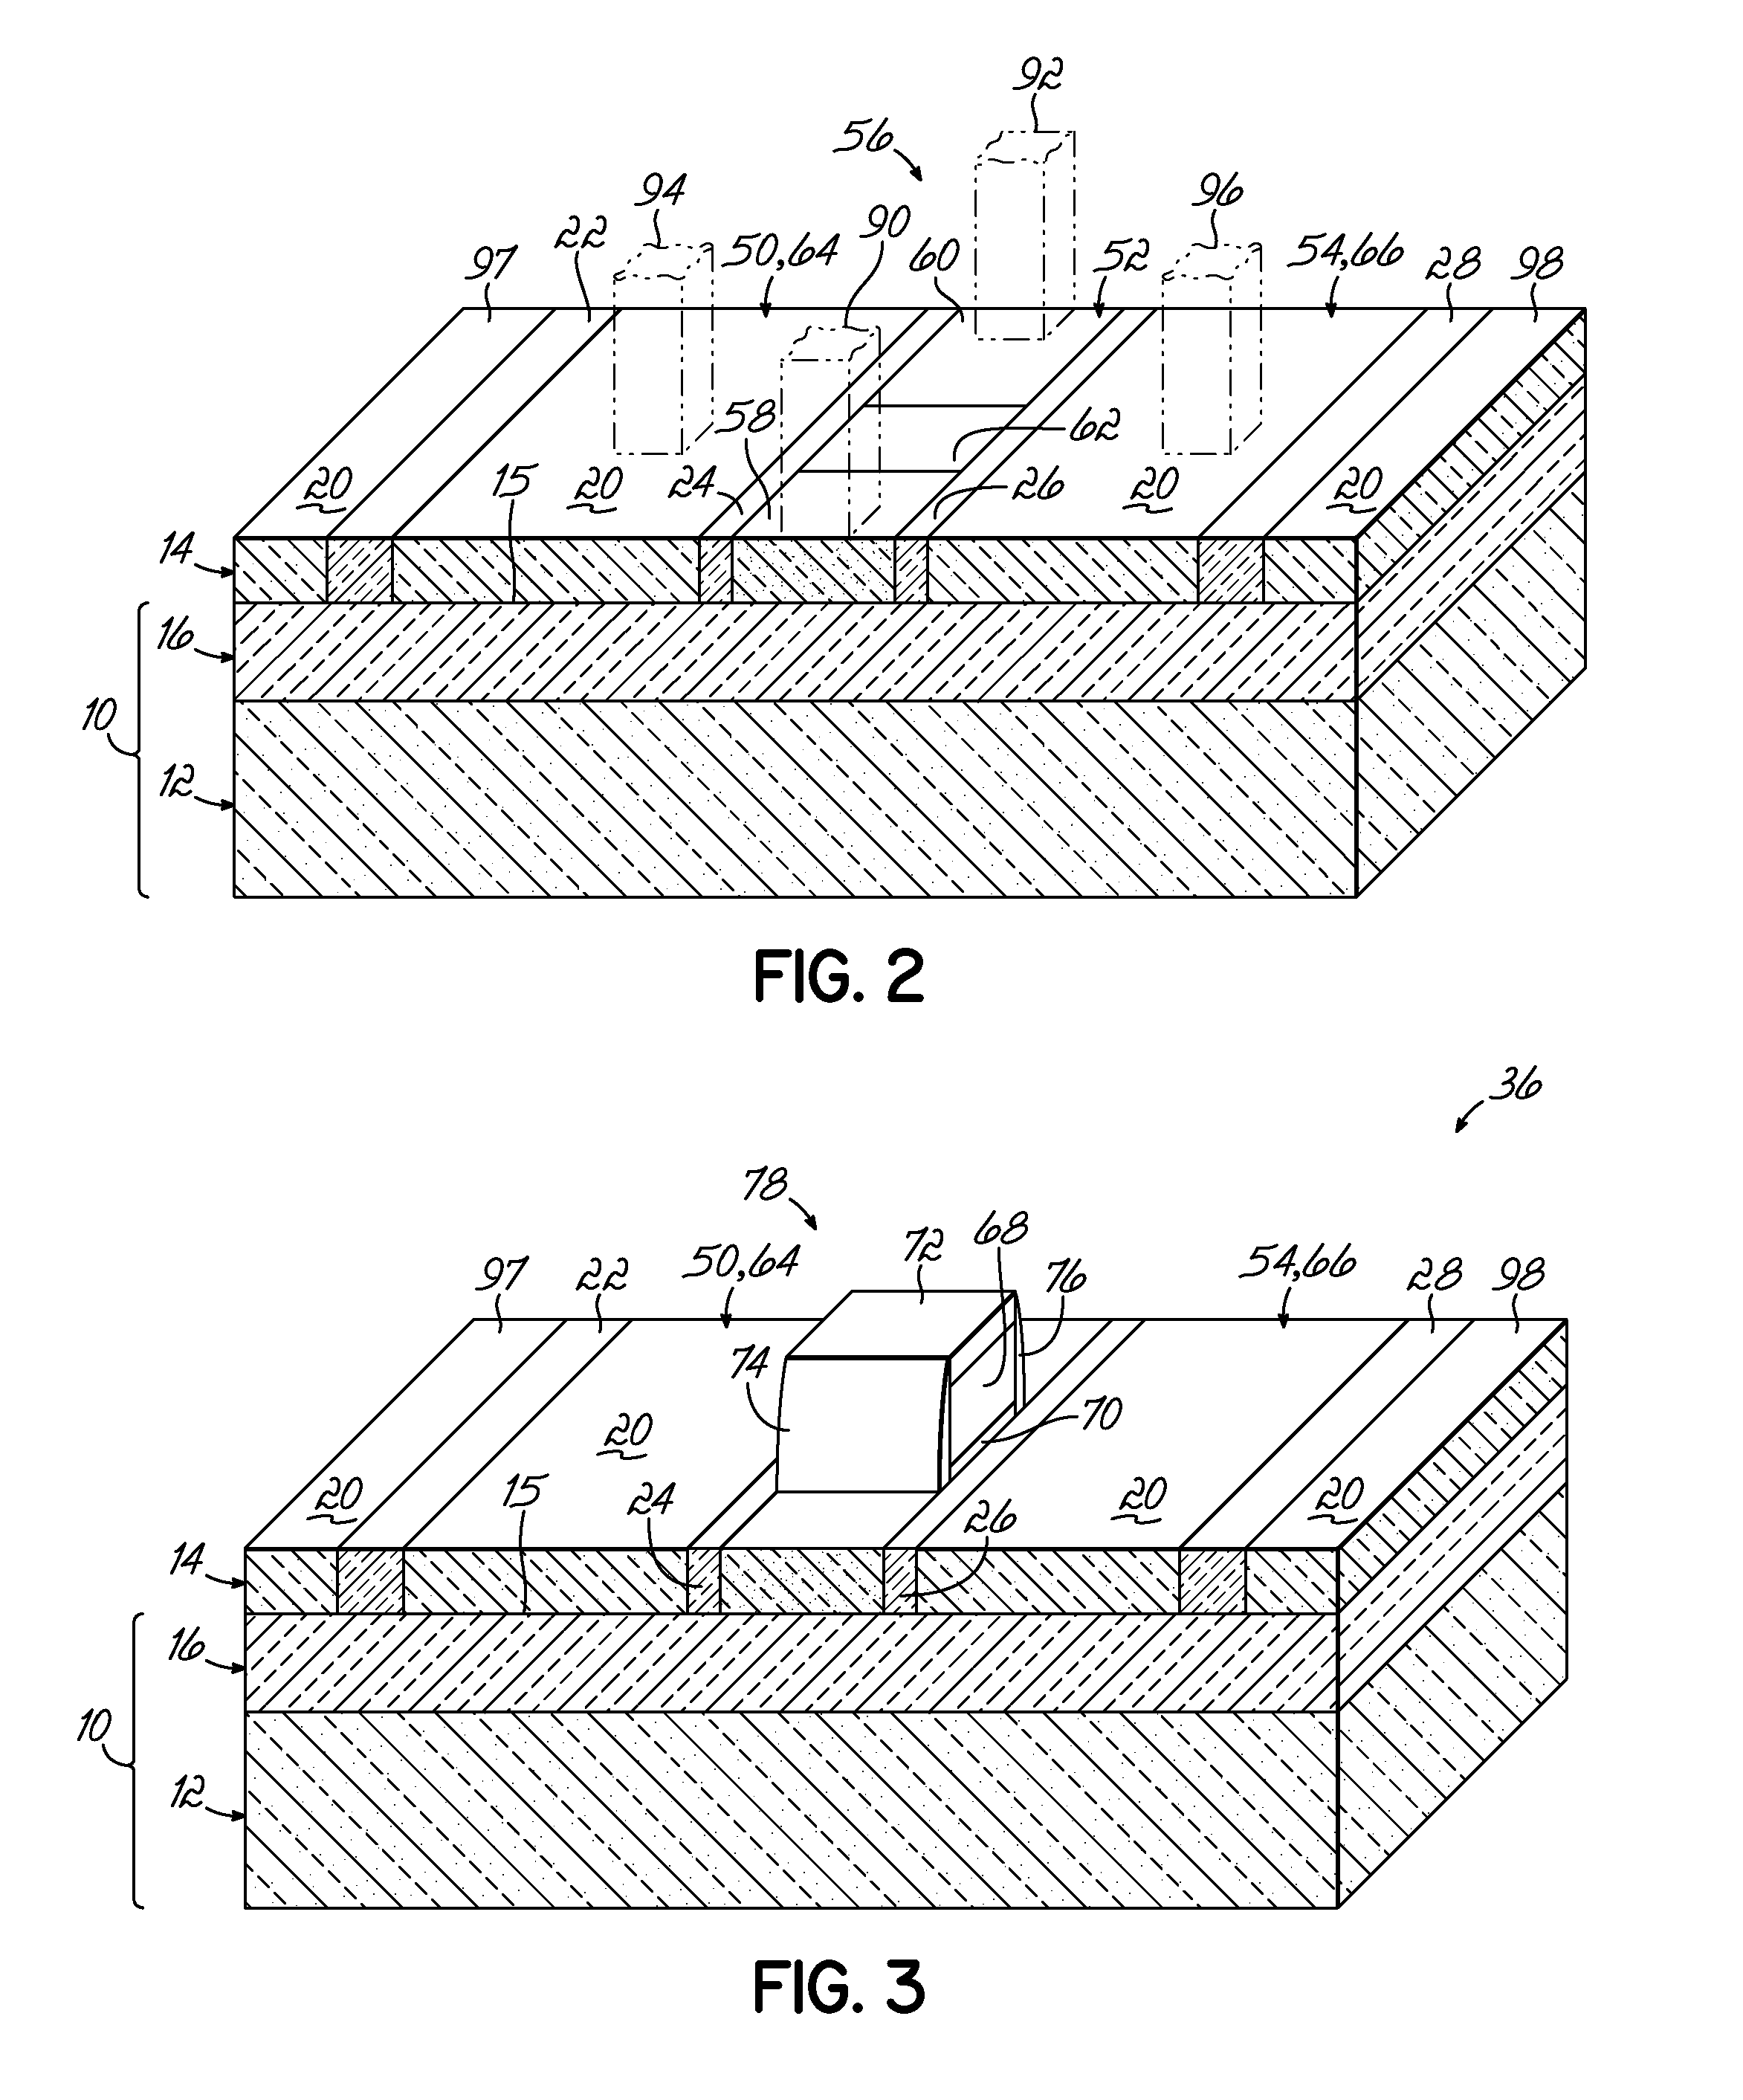 Design structures for high-voltage integrated circuits